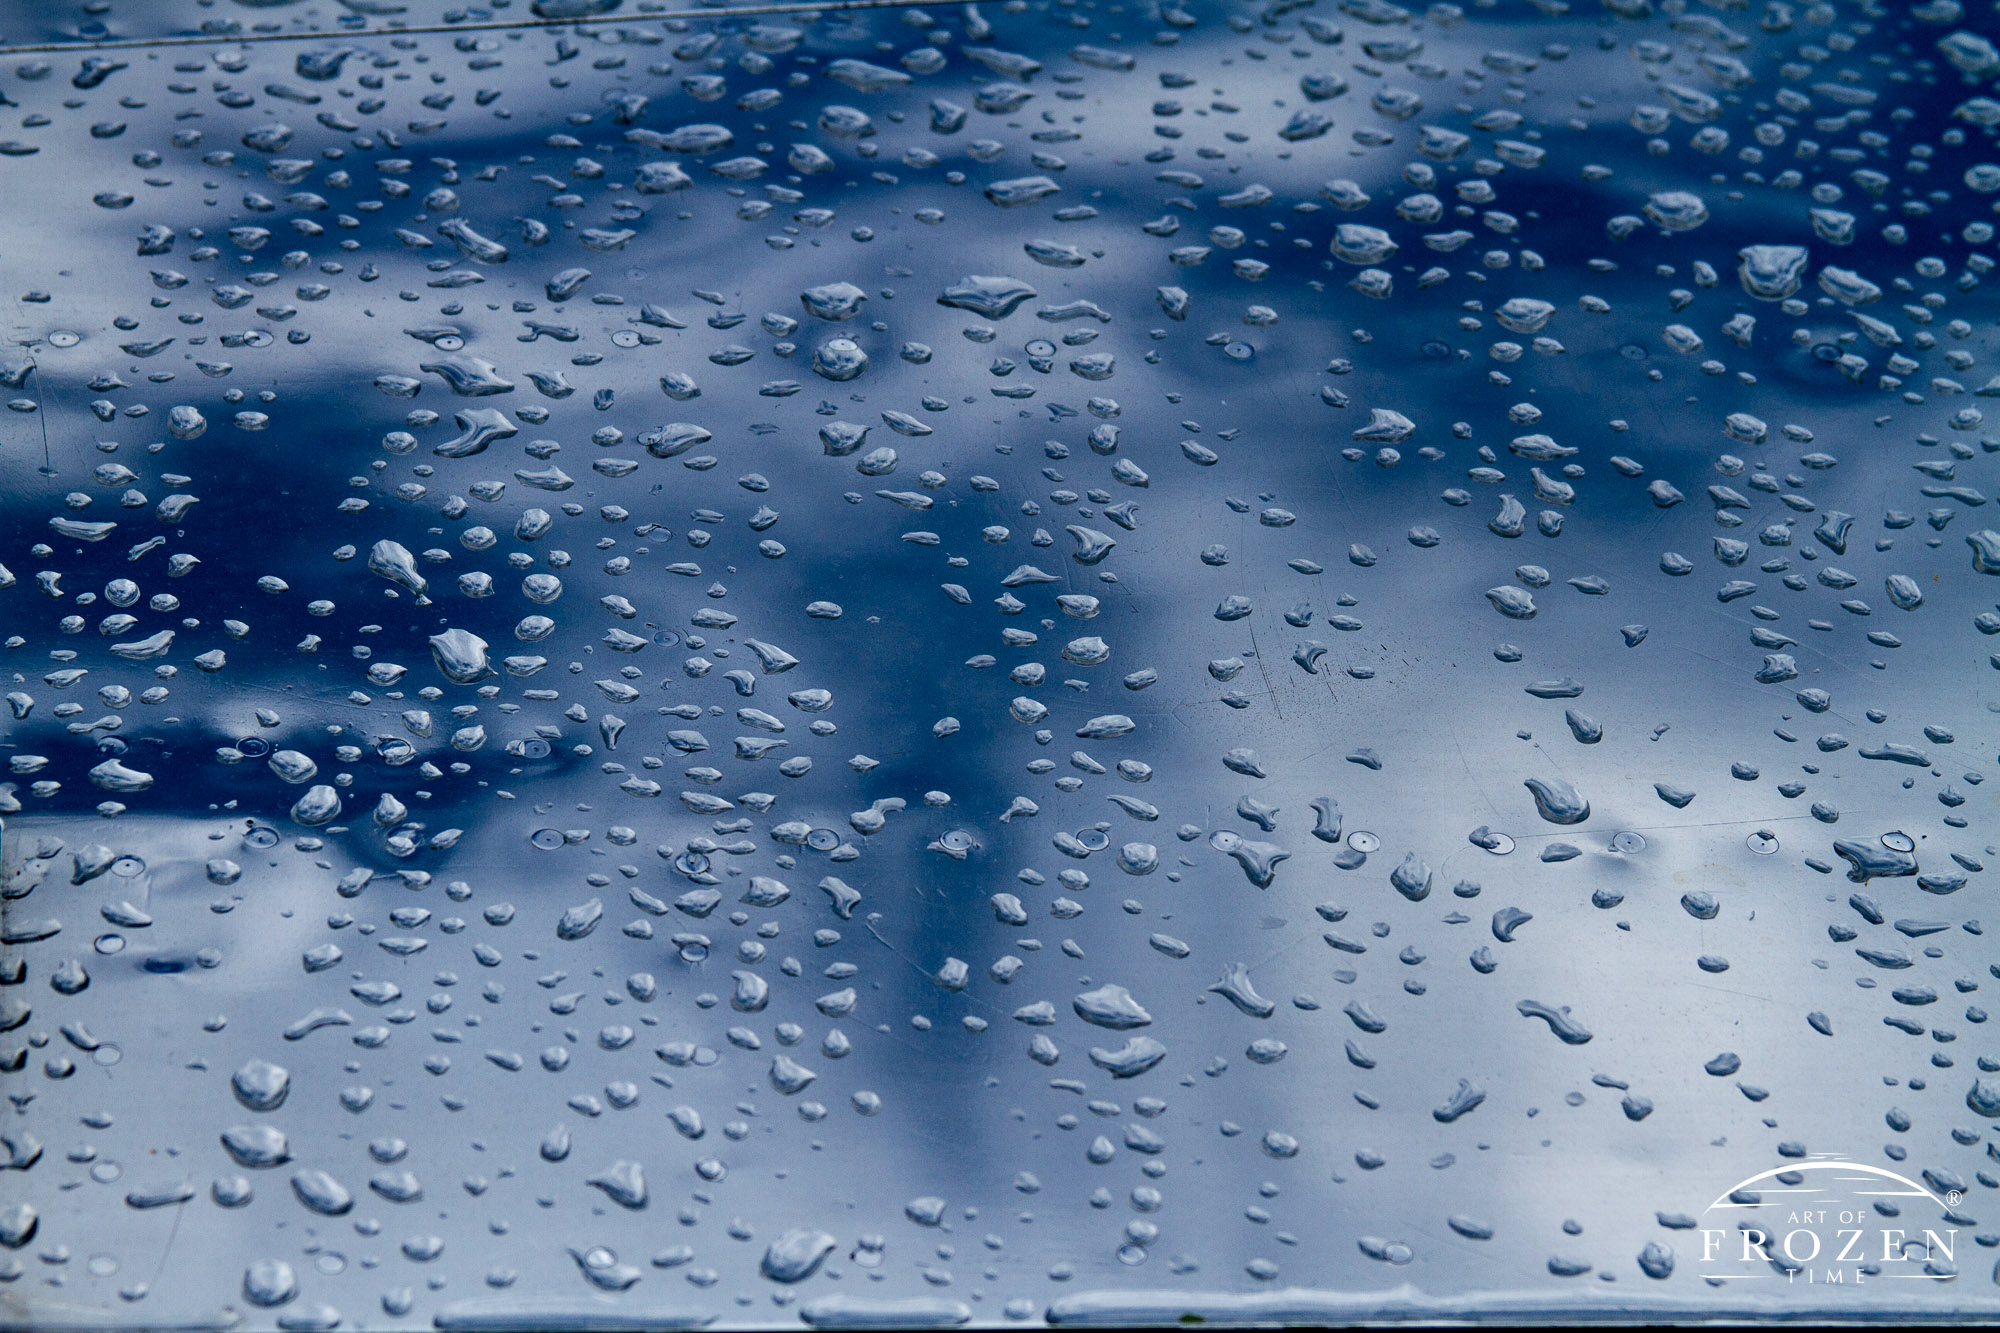 A close up view of a polished aluminum wing where raindrops shimmer on the reflective surface as the skies cleared.